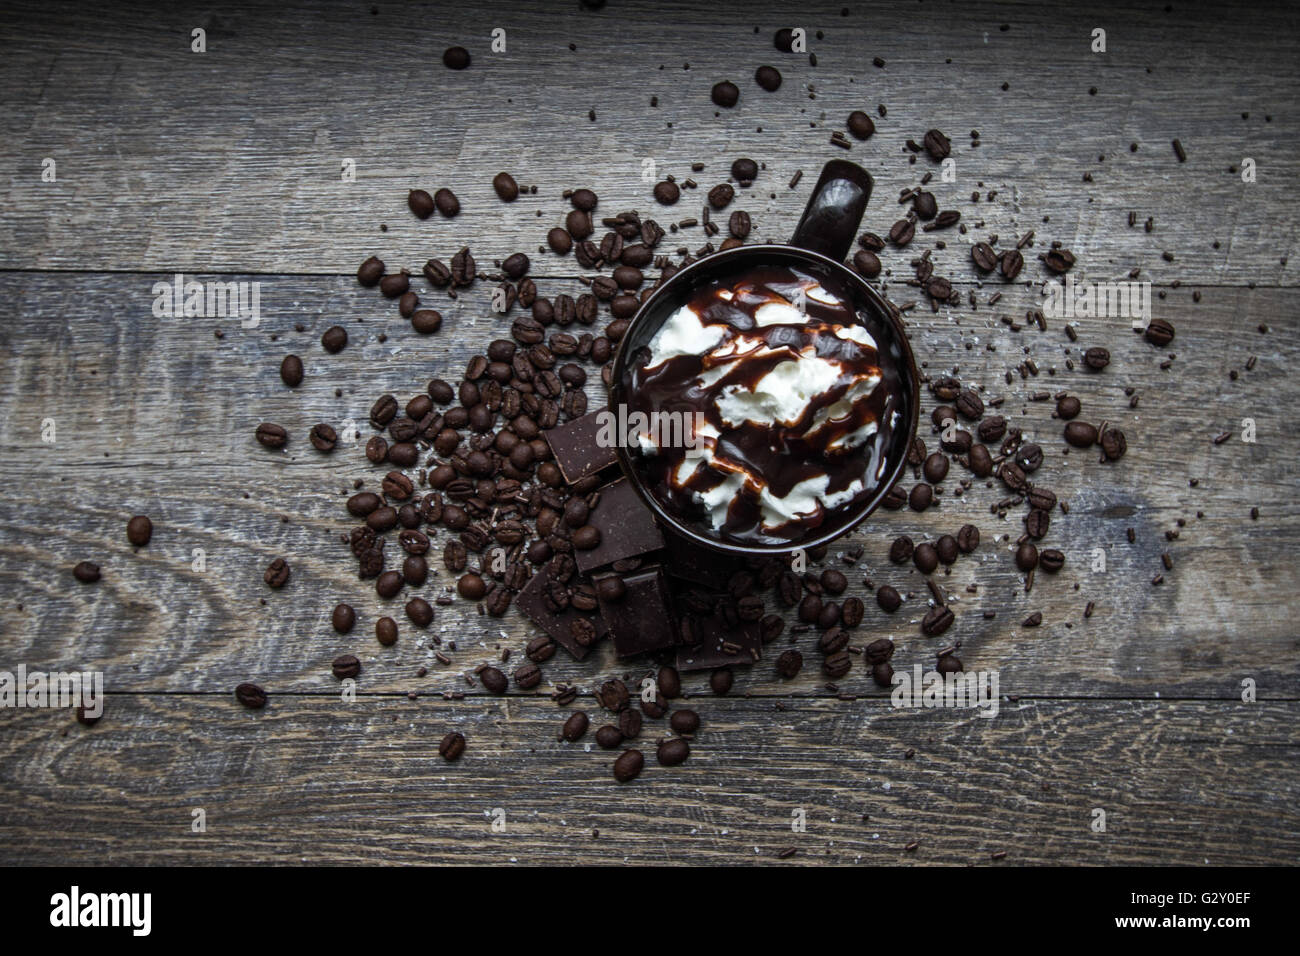 Mocha Latte With Coffee Beans And Dark Chocolate. Mocha Latte shot from above surrounded with coffee beans and pieces of dark ch Stock Photo